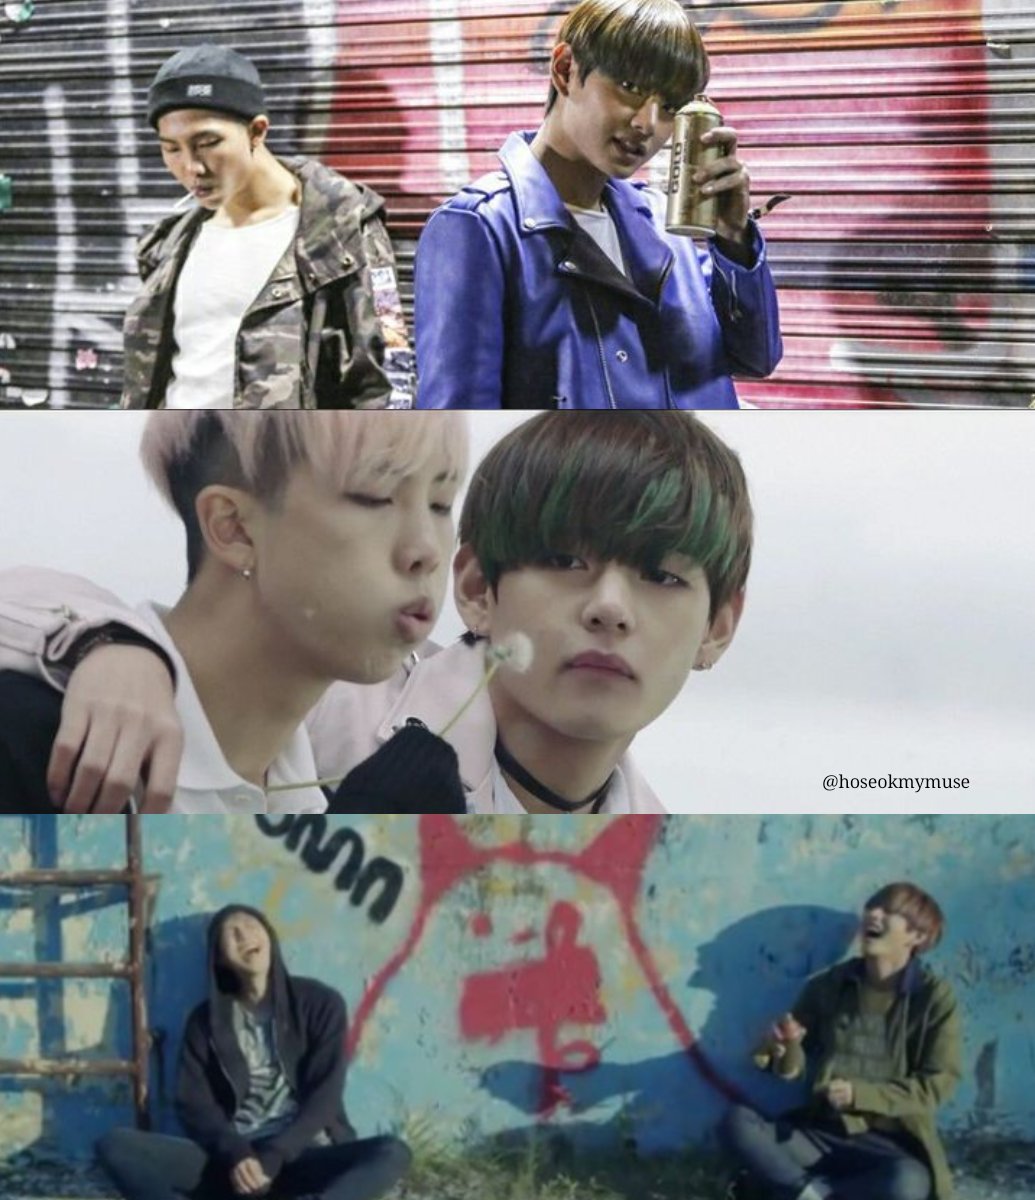 first off; taehyung and namjoon ㅡ tae is the "raging youth" who has already stepped into the "adulthood" by k!ll!ng his f@ther both physically & figuratively. in the end of "bts prologue" tae finally d!ved in the sea which represents that he jumped into the "adulthood" and ++